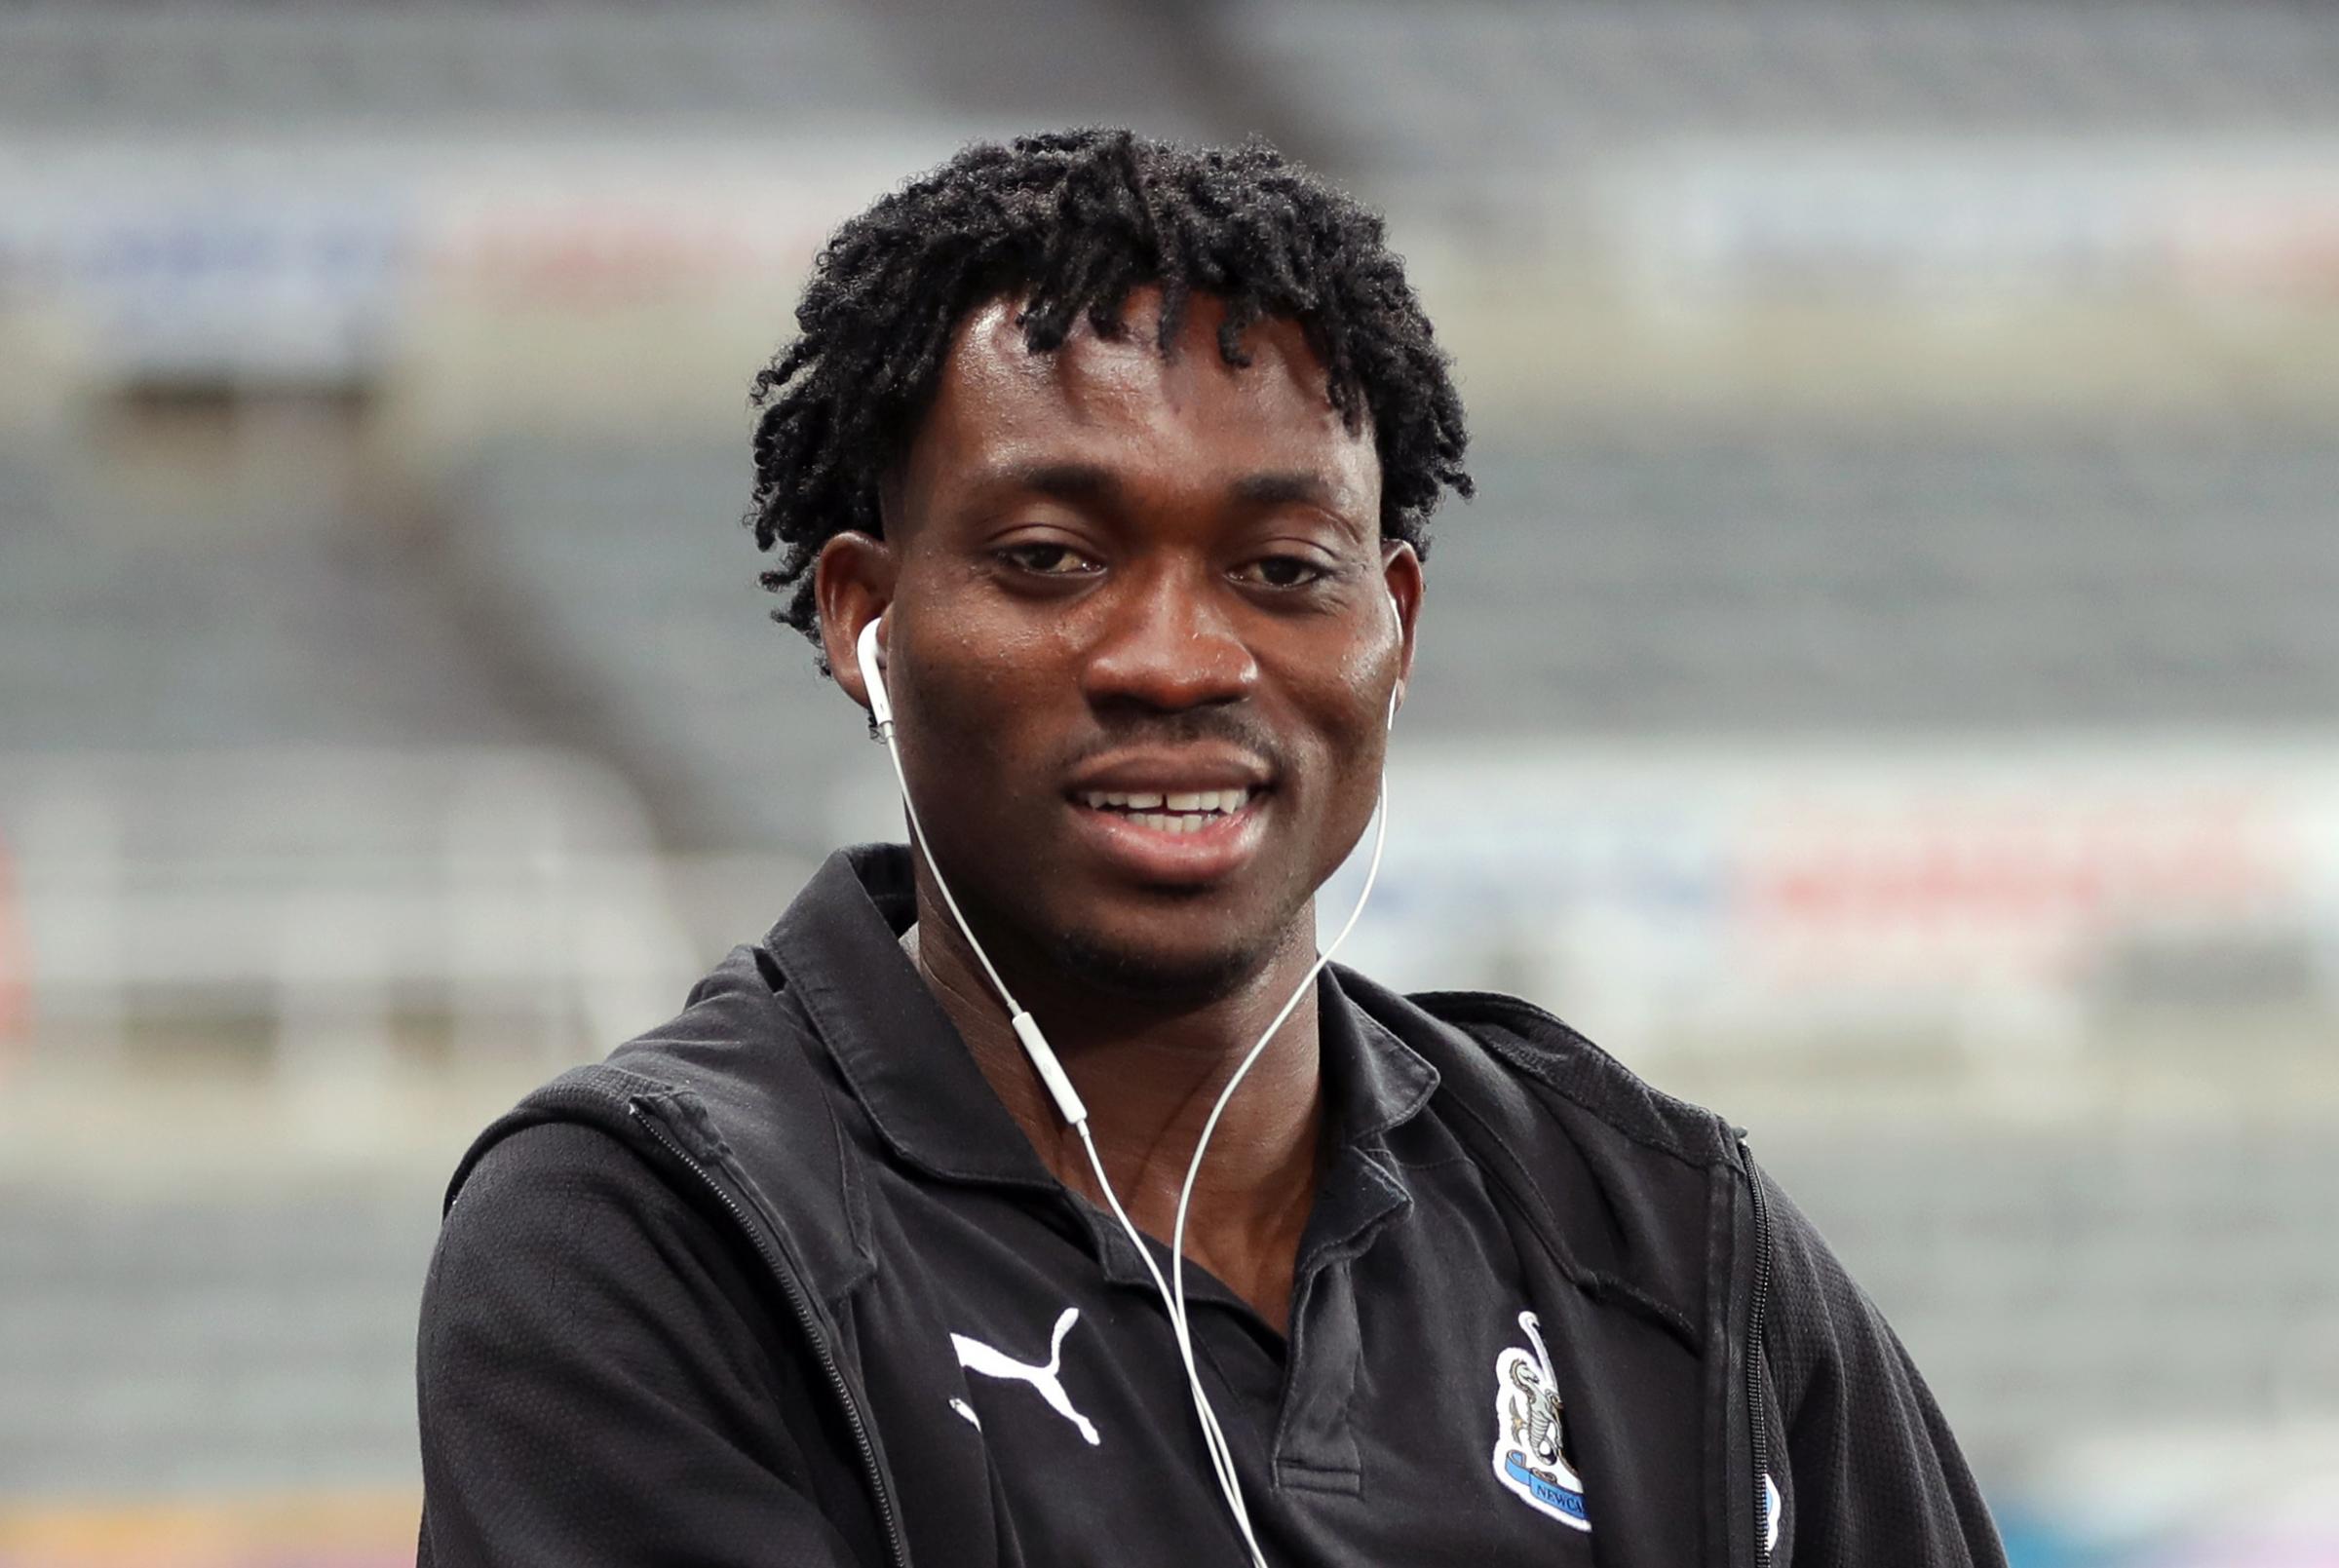 Newcastle: Christian Atsu rescued from rubble after Turkey earthquake